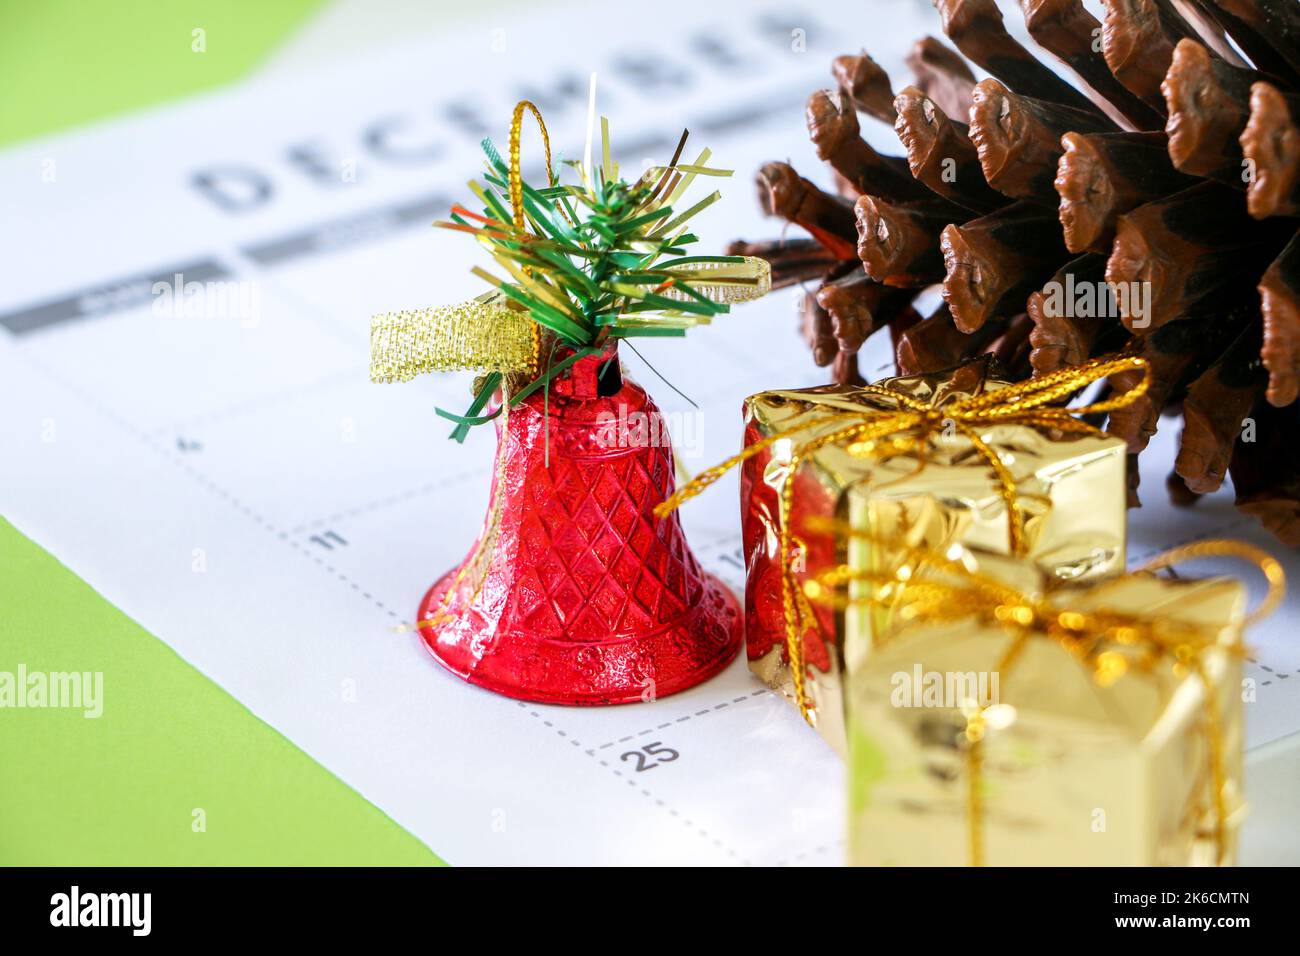 25th December Christmas day on Calendar surrounded by festive decor, pine cone, a shiny red bell, and two gold wrapped presents, Christmas concept Stock Photo